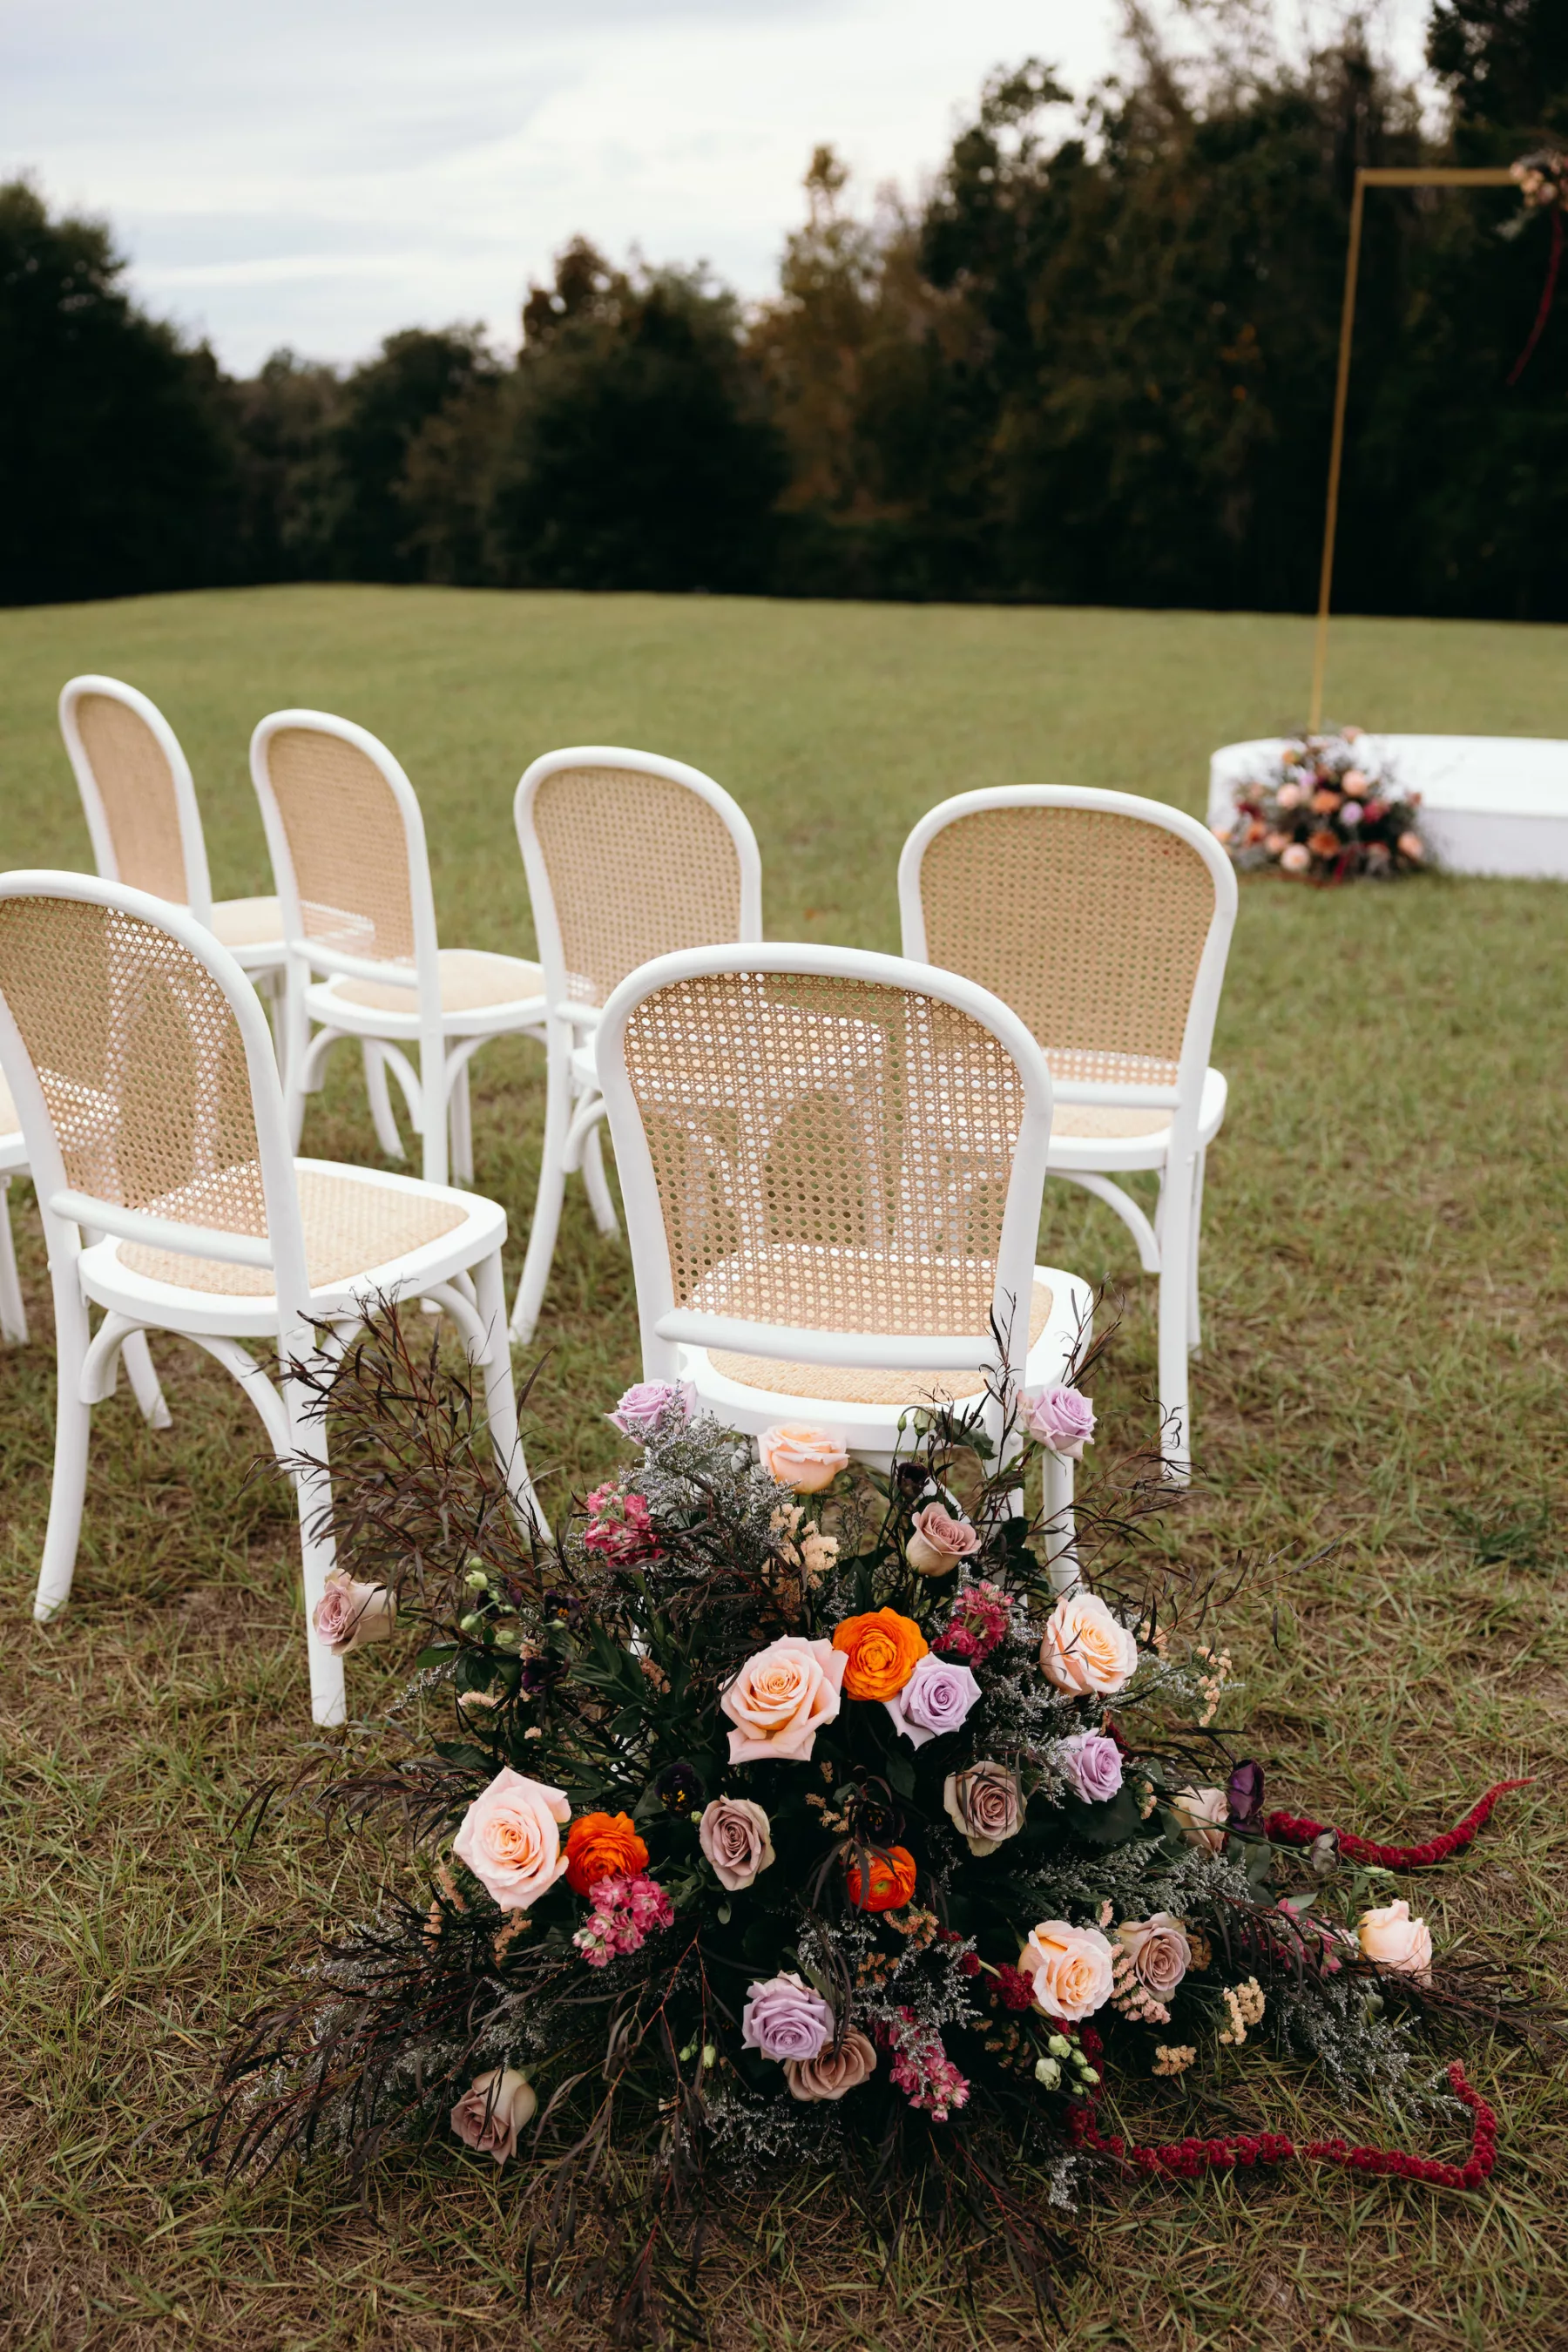 Moody Purple and Peach Whimsical Outdoor Field Wedding Ceremony Inspiration | White and Rattan Chair Ideas | Pink, Orange, Purple, and White Roses, Amaranthus, and Greenery Aisle Decor | Tampa Bay Event Venue La Hacienda At Snow Hill | Planner MDP Events | Florist Save The Date Florida